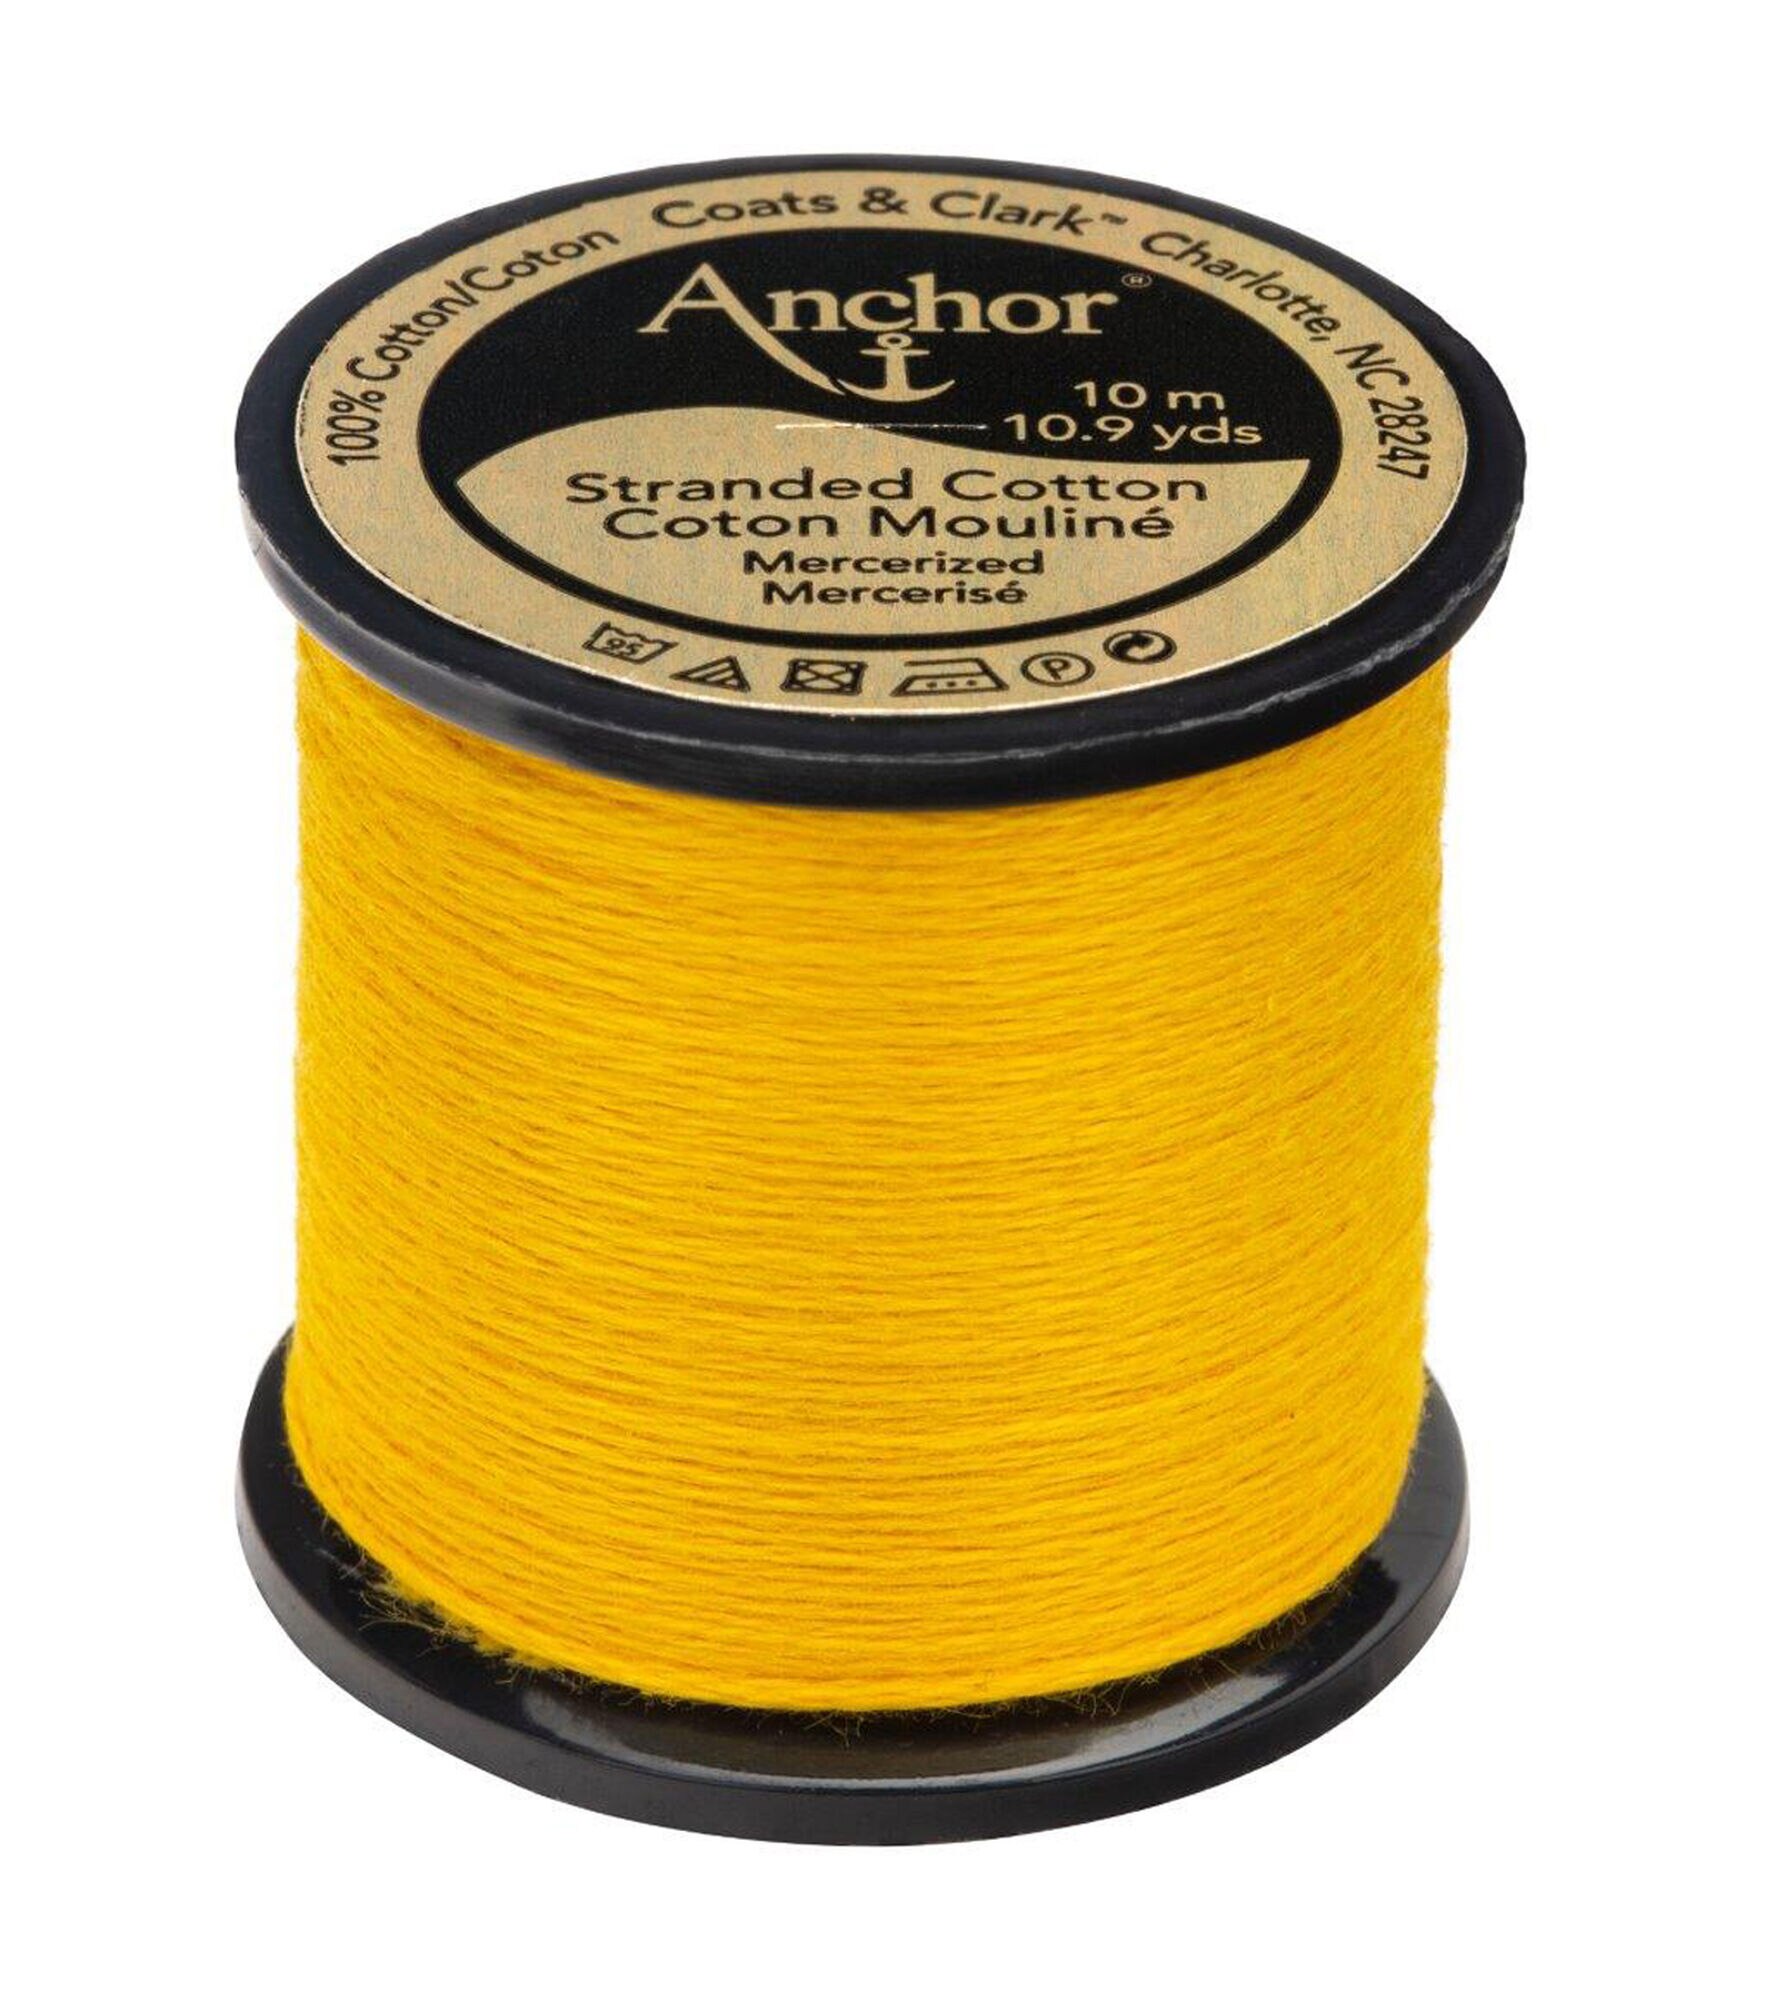 Anchor Cotton 10.9yd Yellows & Browns Cotton Embroidery Floss, 298 Jonquil Dark, hi-res